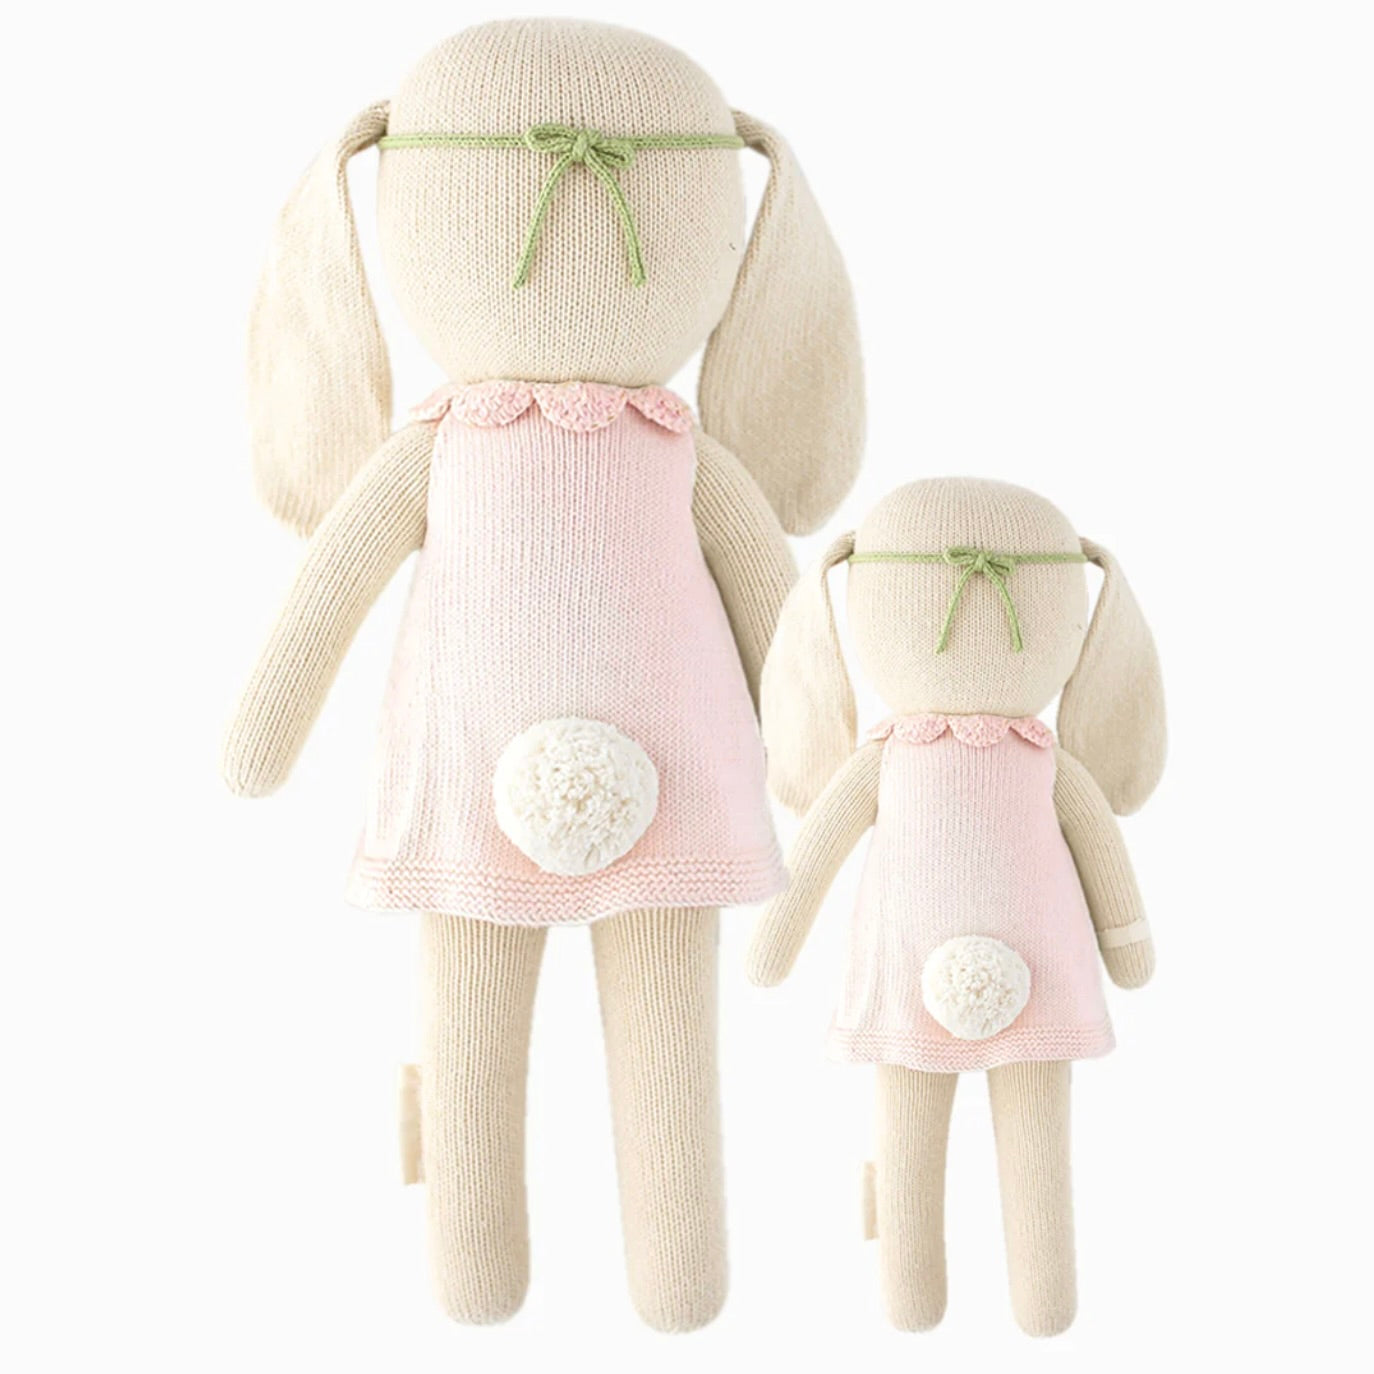 Pink Hannah the Bunny by Cuddle + Kind  - 2 sizes